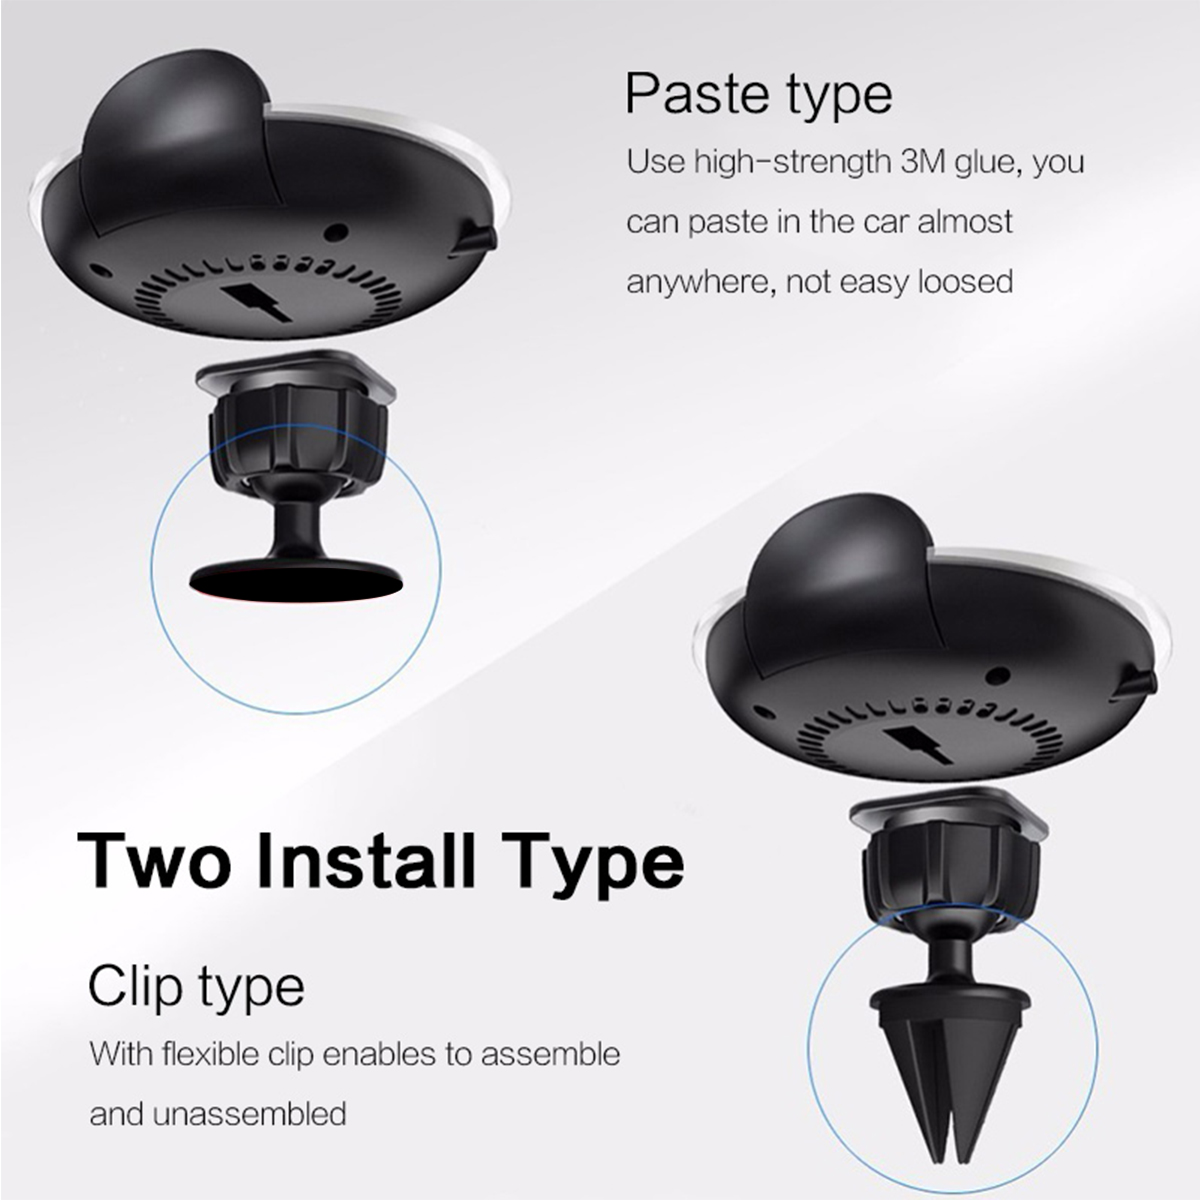 360-Degree-Wireless-Car-Mount-Charger-Dock-Air-Vent-Mount-Holder-for-iPhone-8-Plus-X-1206374-3